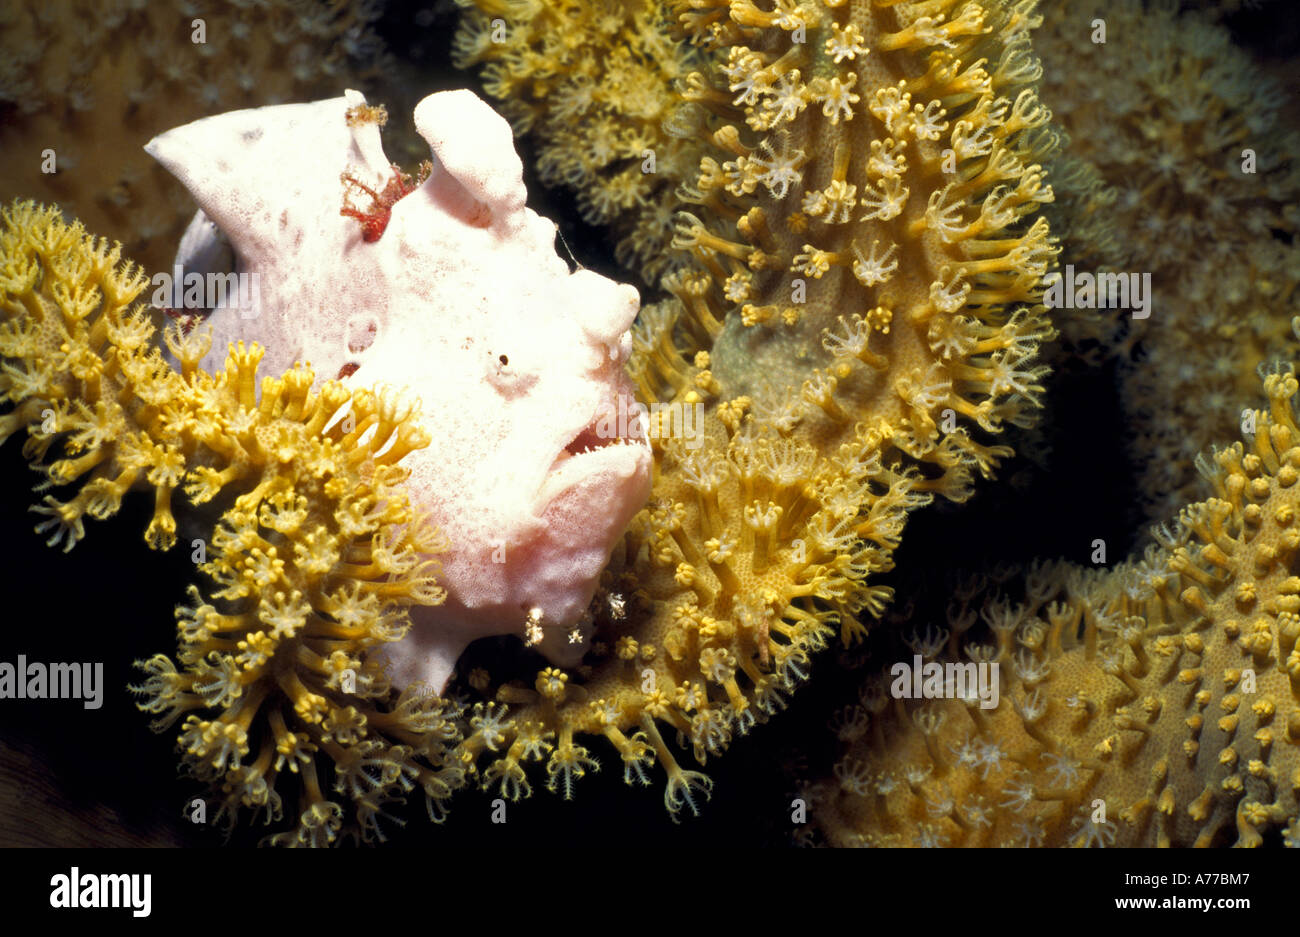 A white Frogfish (Antennarius commerson) amongst soft coral. Stock Photo